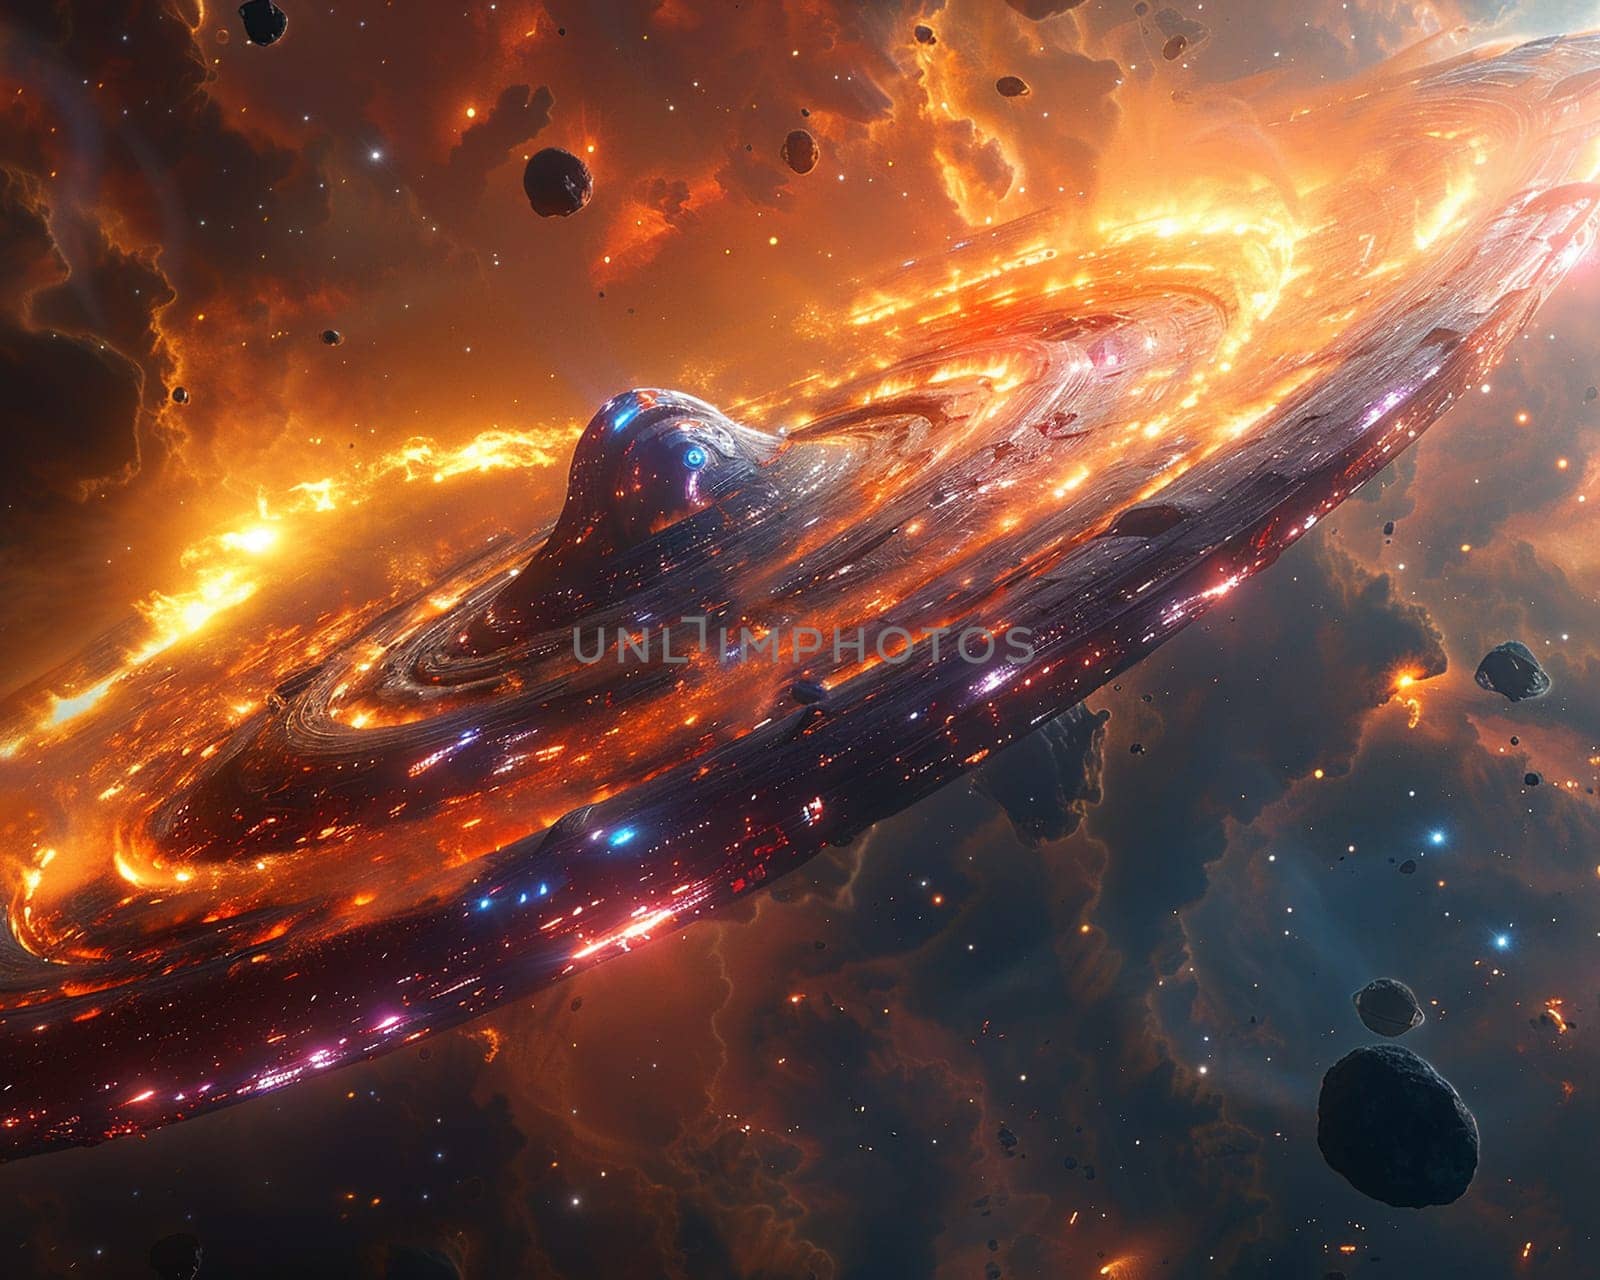 Starship navigating through a wormhole, in a digitally illustrated cosmic journey.